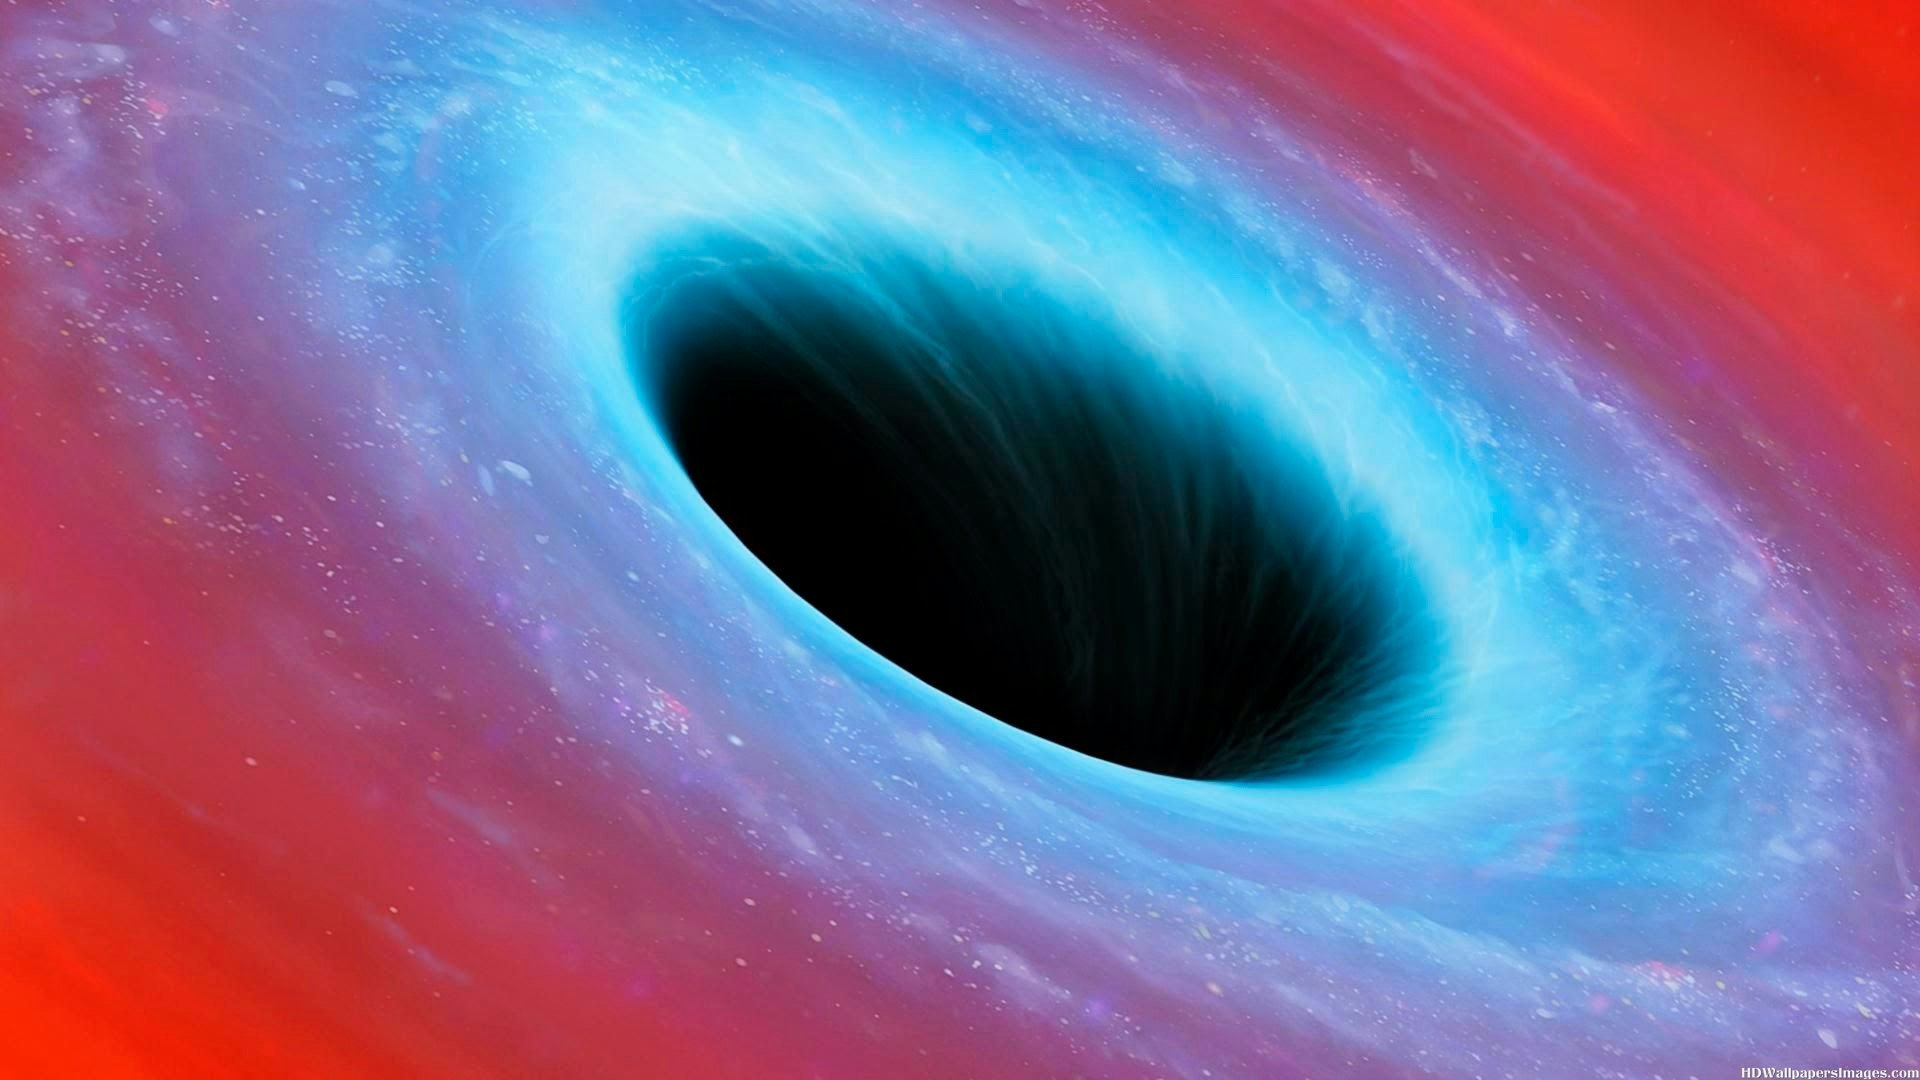 going into a black hole